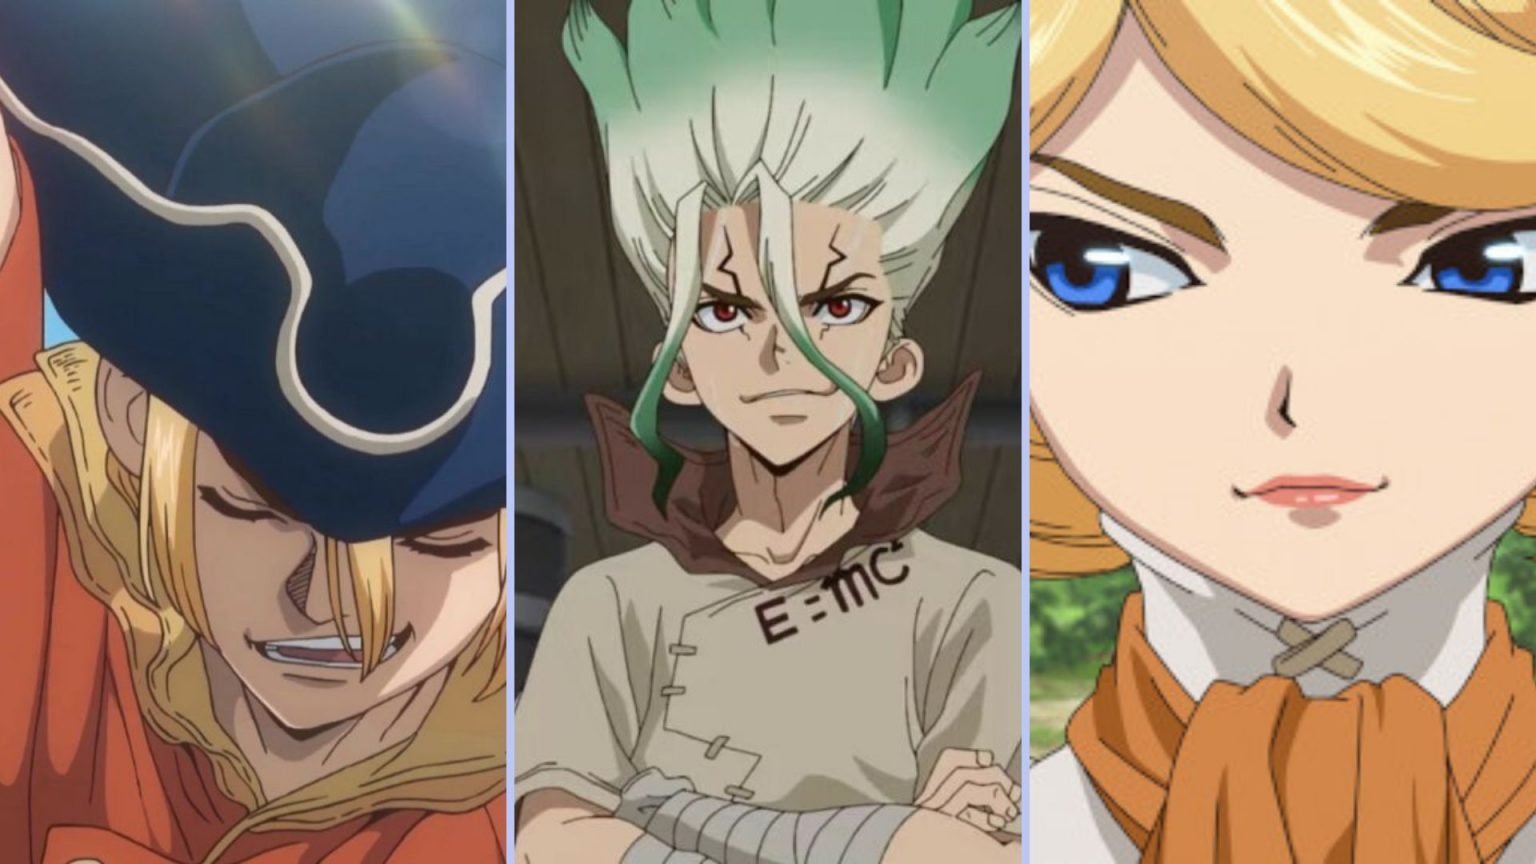 dr. stone and scientific journey in anime narratives